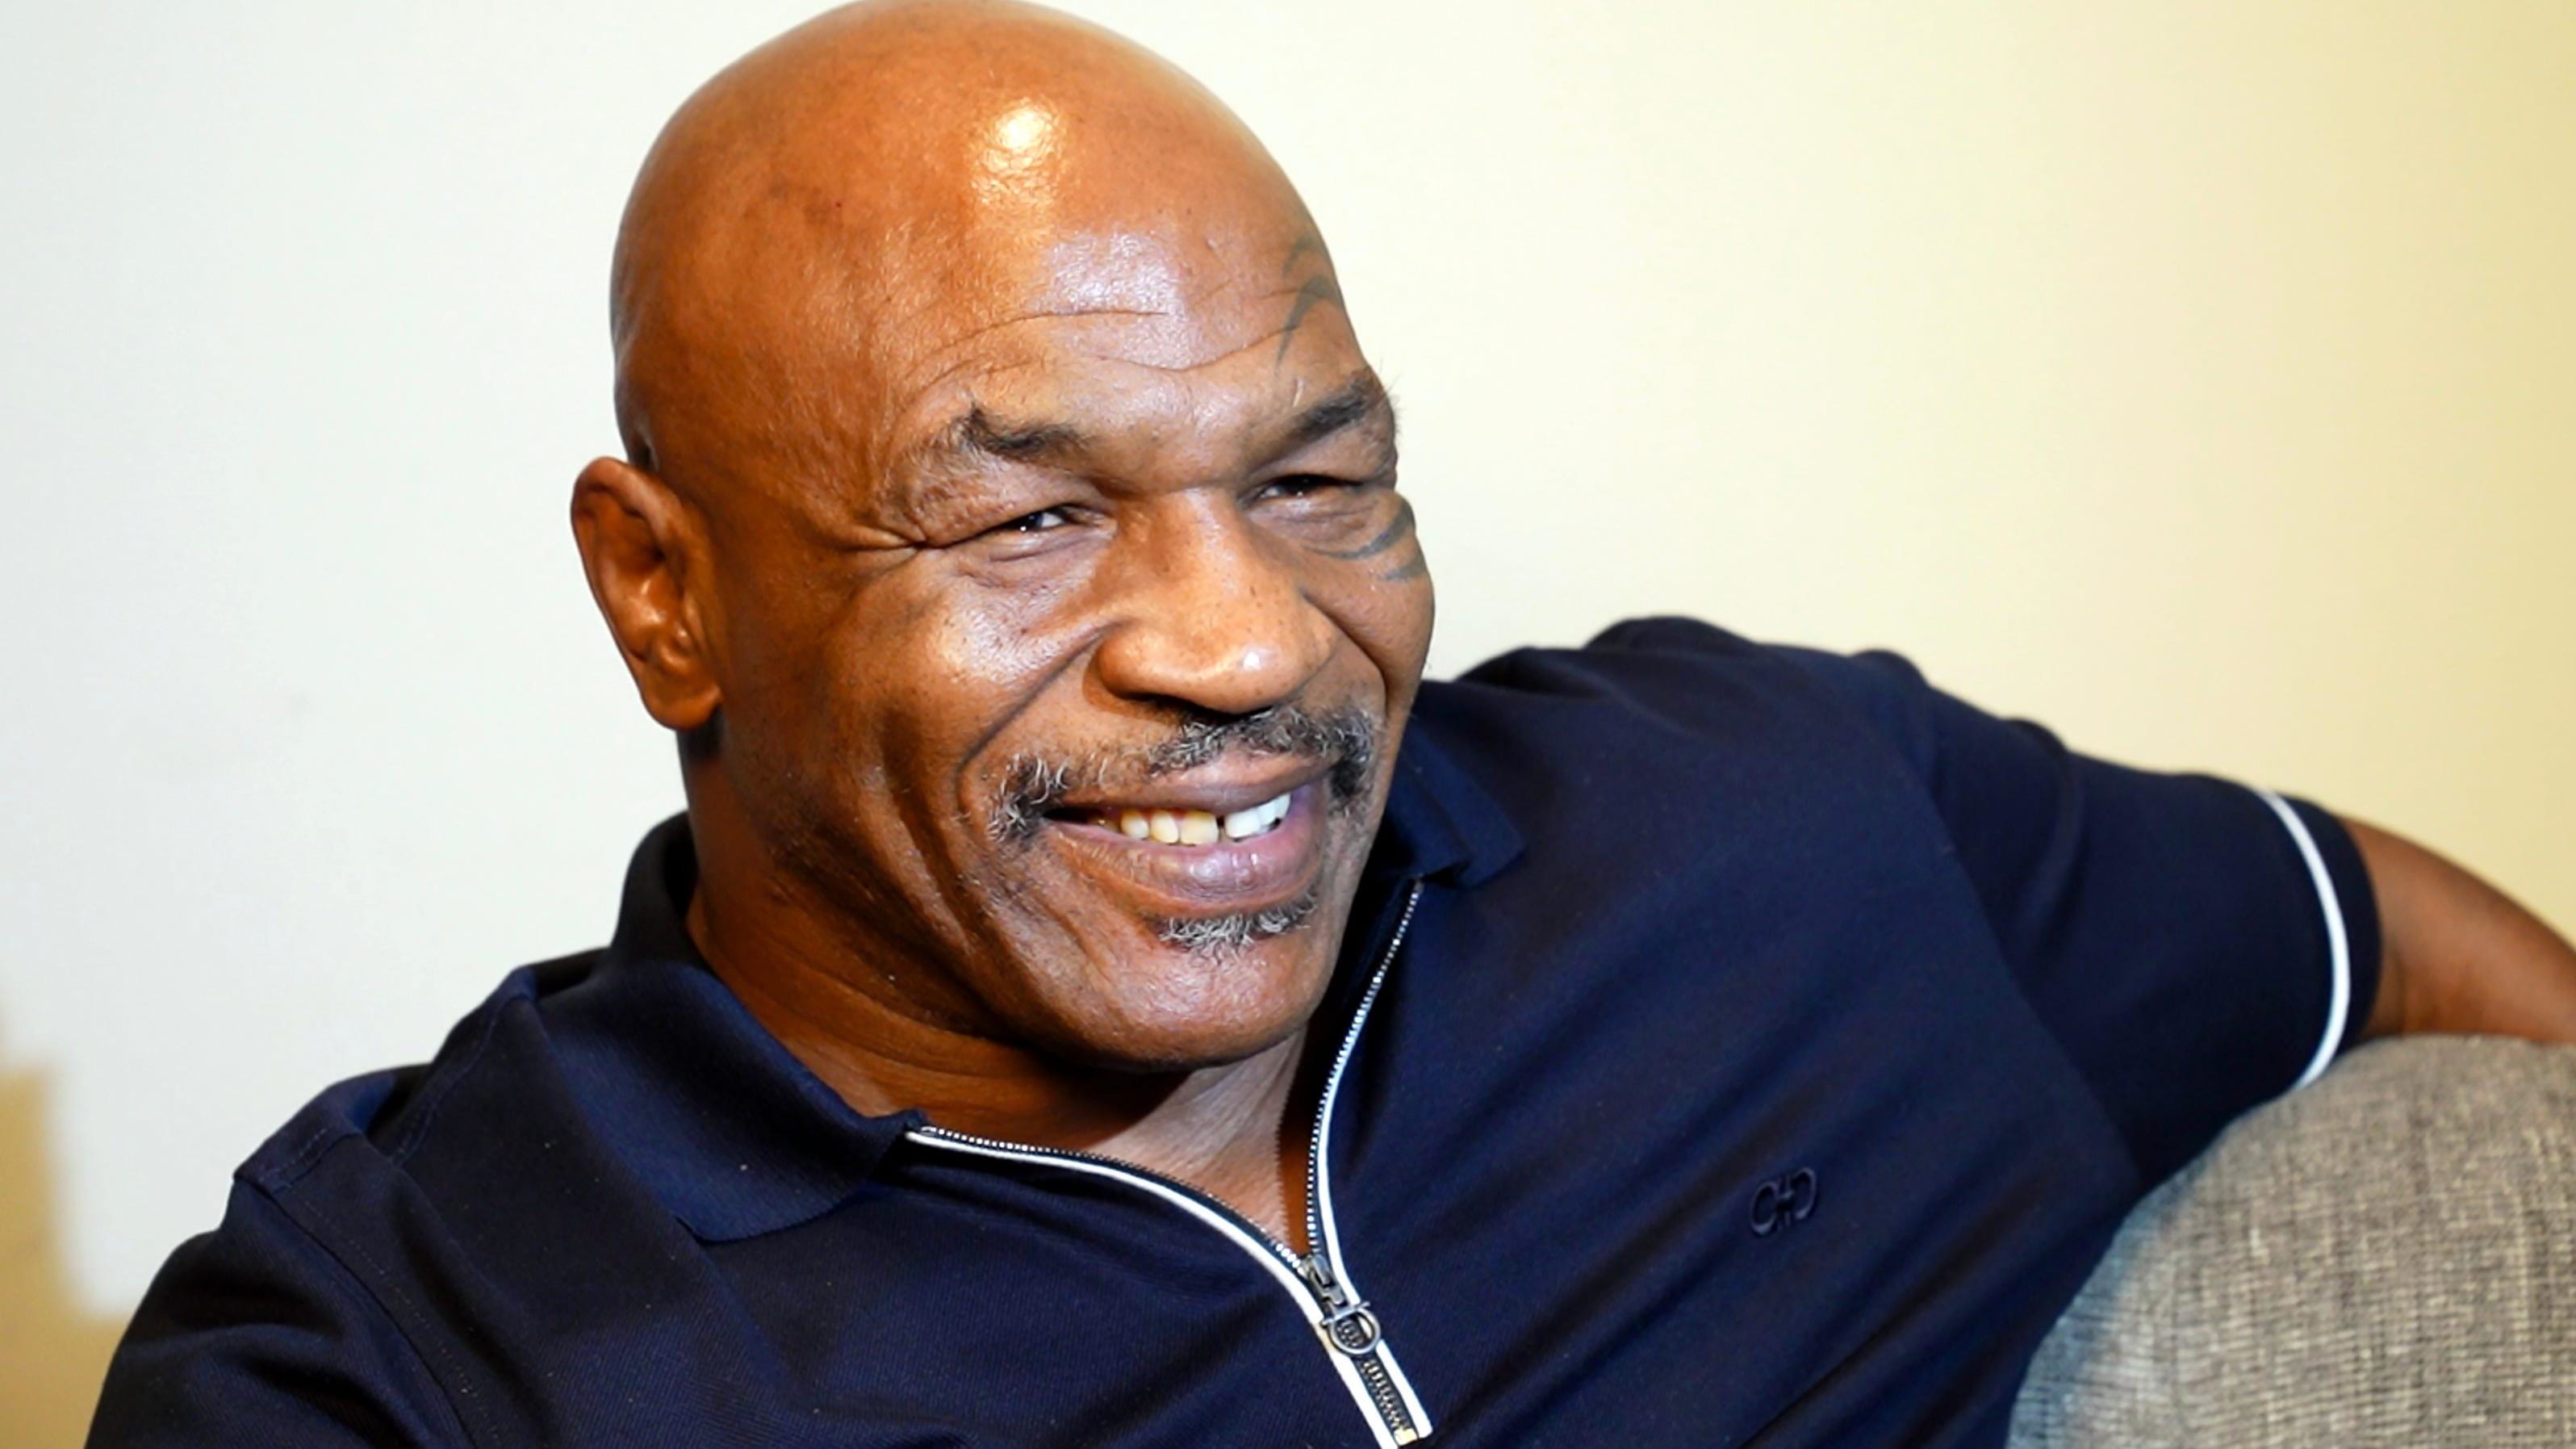 Former heavyweight boxing champ Mike Tyson